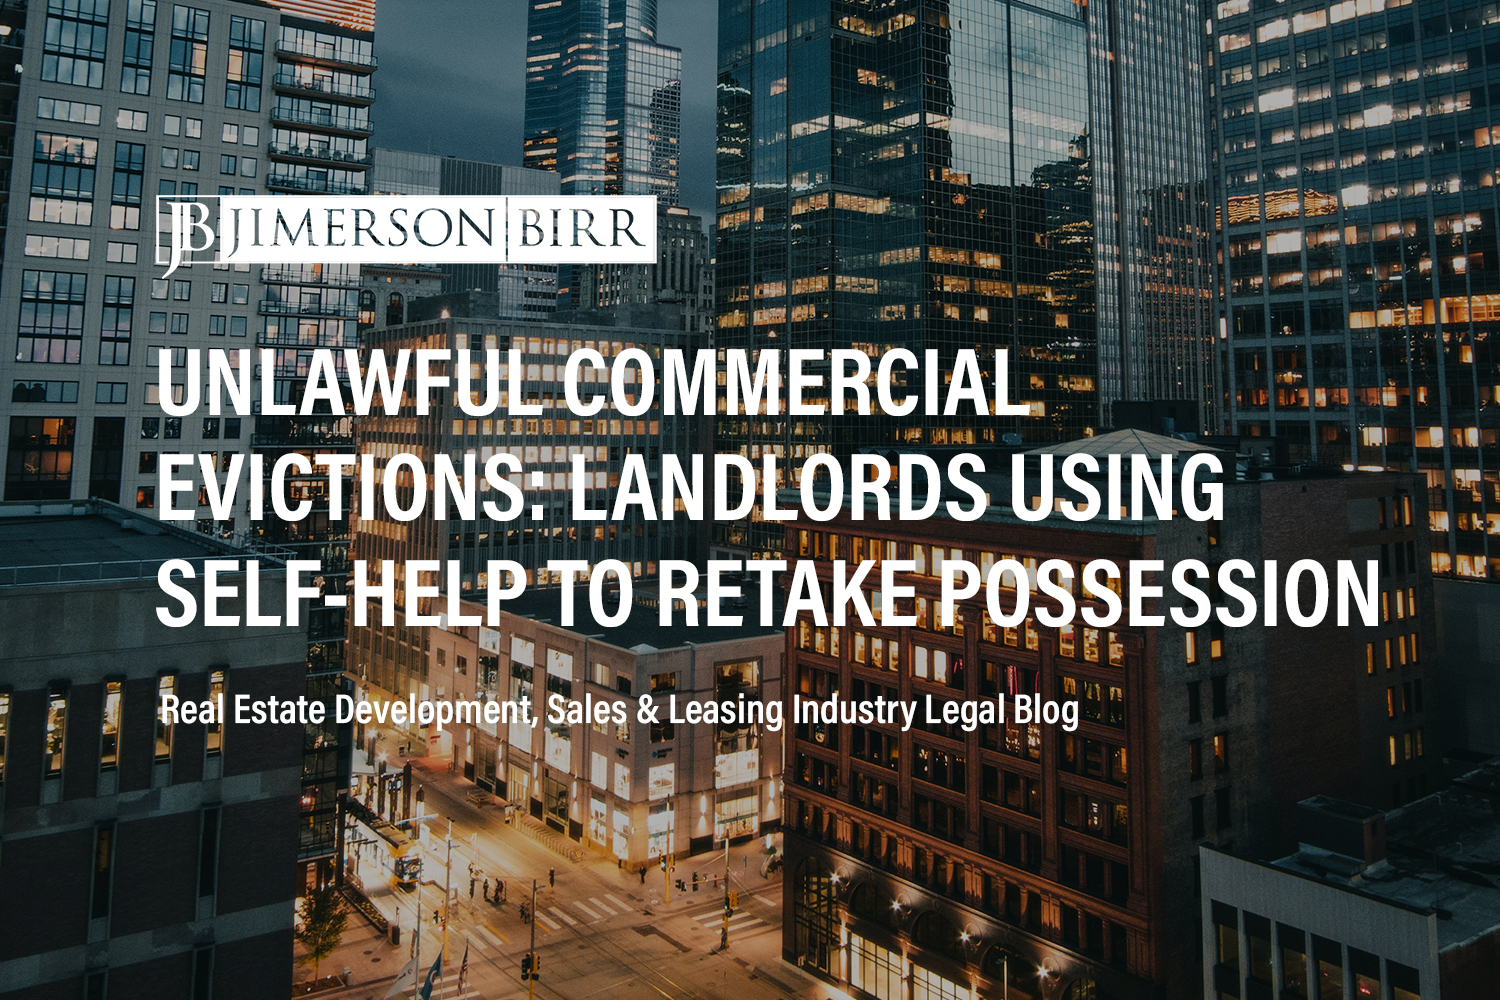 Unlawful Commercial Evictions: A Cautionary Tale for Commercial Landlords Wanting to Use Self-Help to Retake Possession of Leased Property